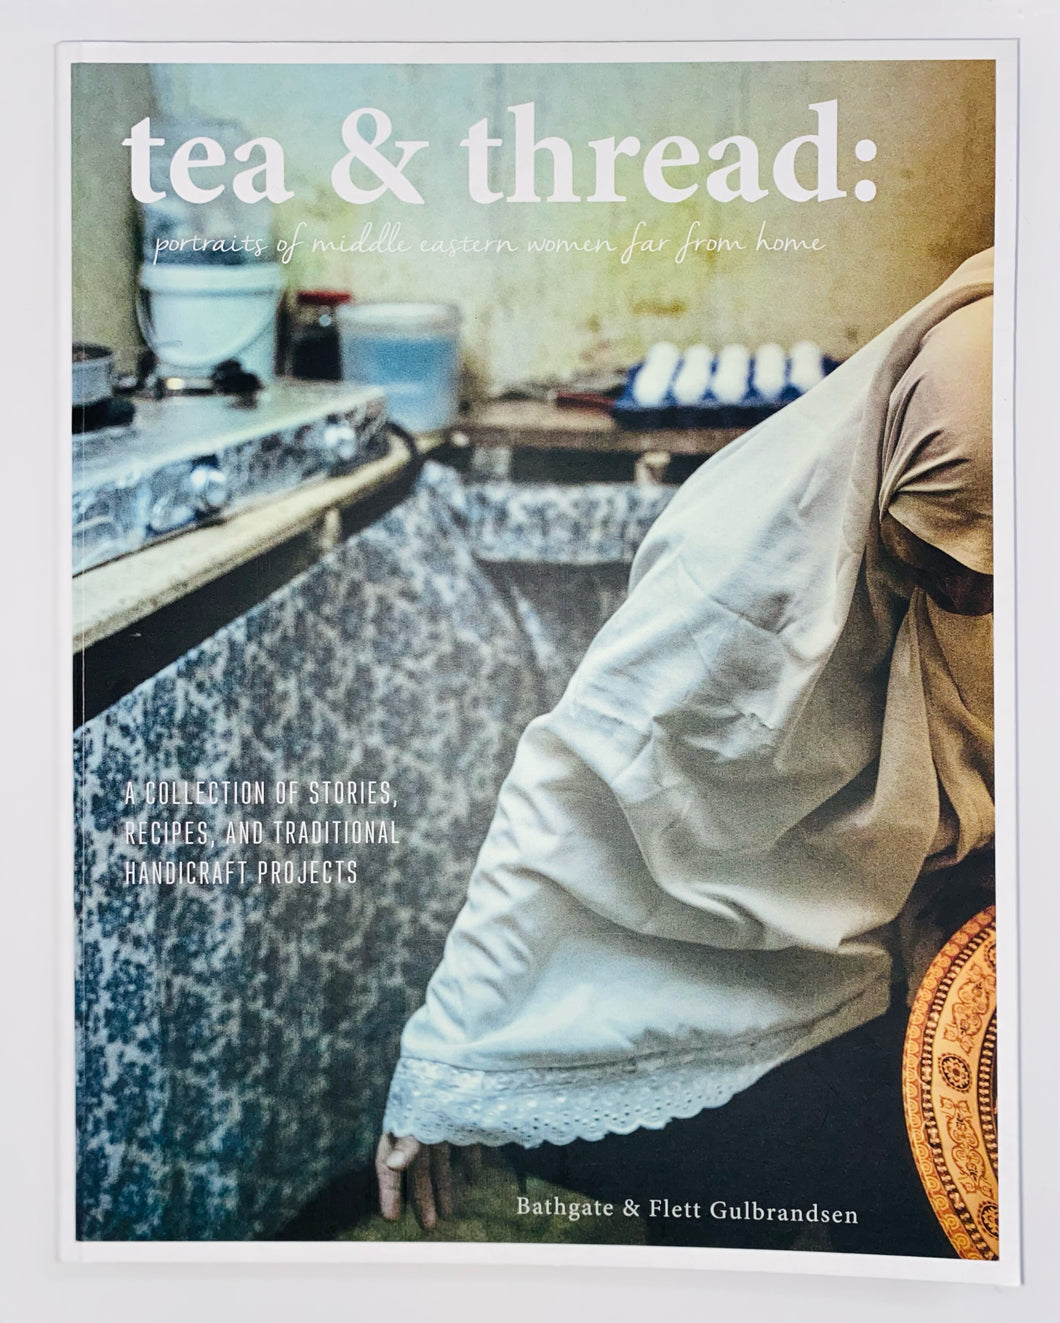 Tea & Thread: Portraits of Middle Eastern Women far from Home